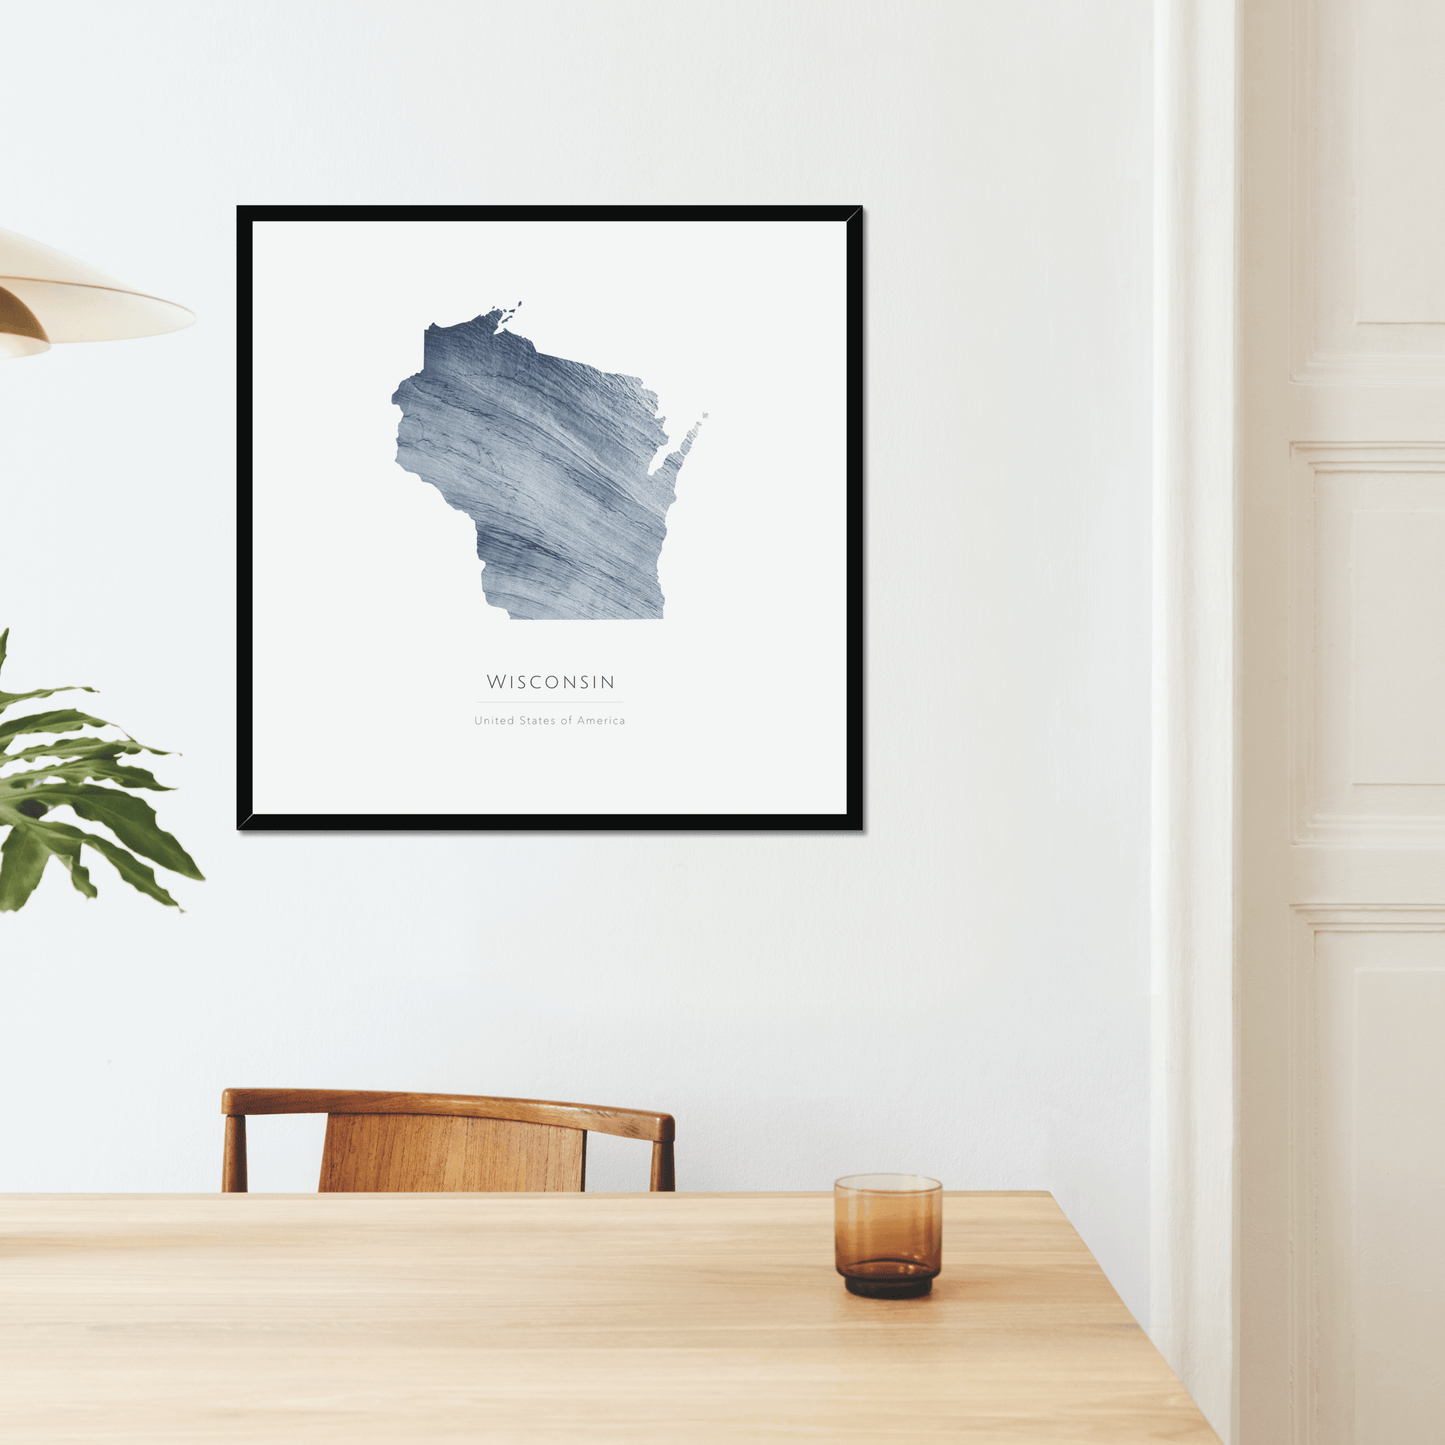 Wisconsin -  Framed & Mounted Map